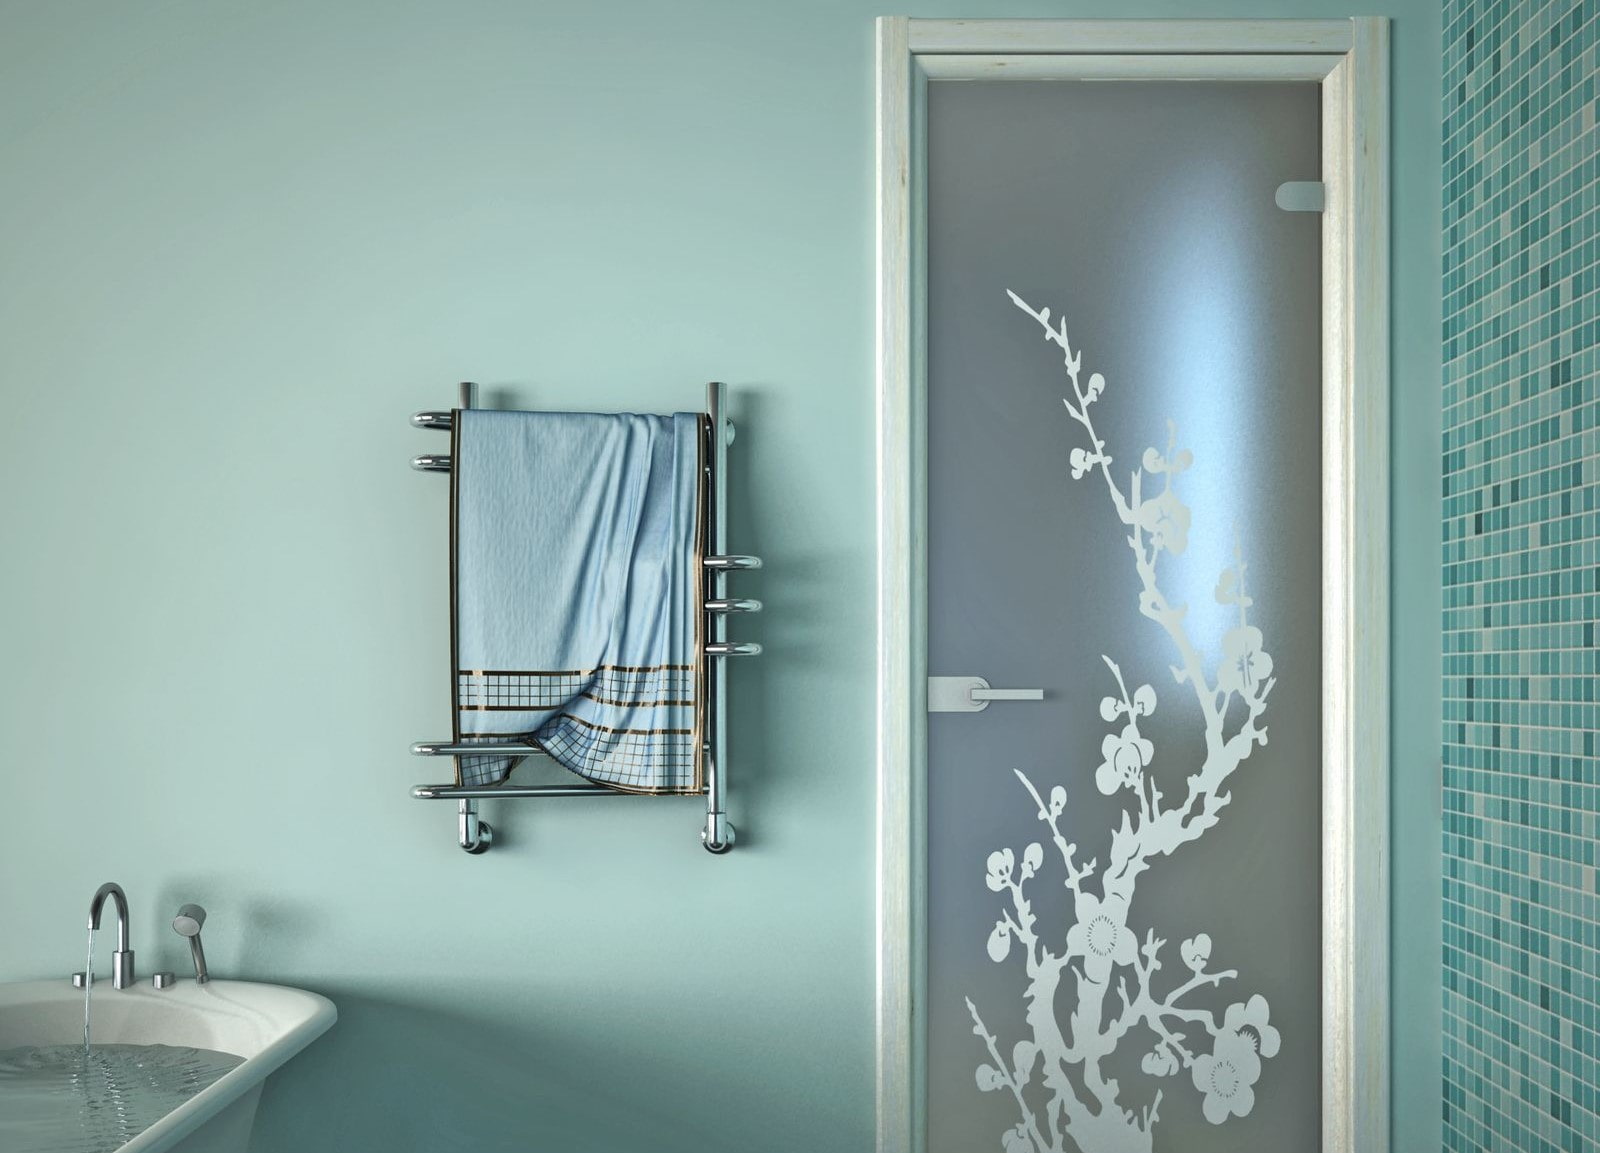 Interior Glass Doors: Best Design Ideas and Application. Frosted glass and the heating towel rail at the background of turquoise wall